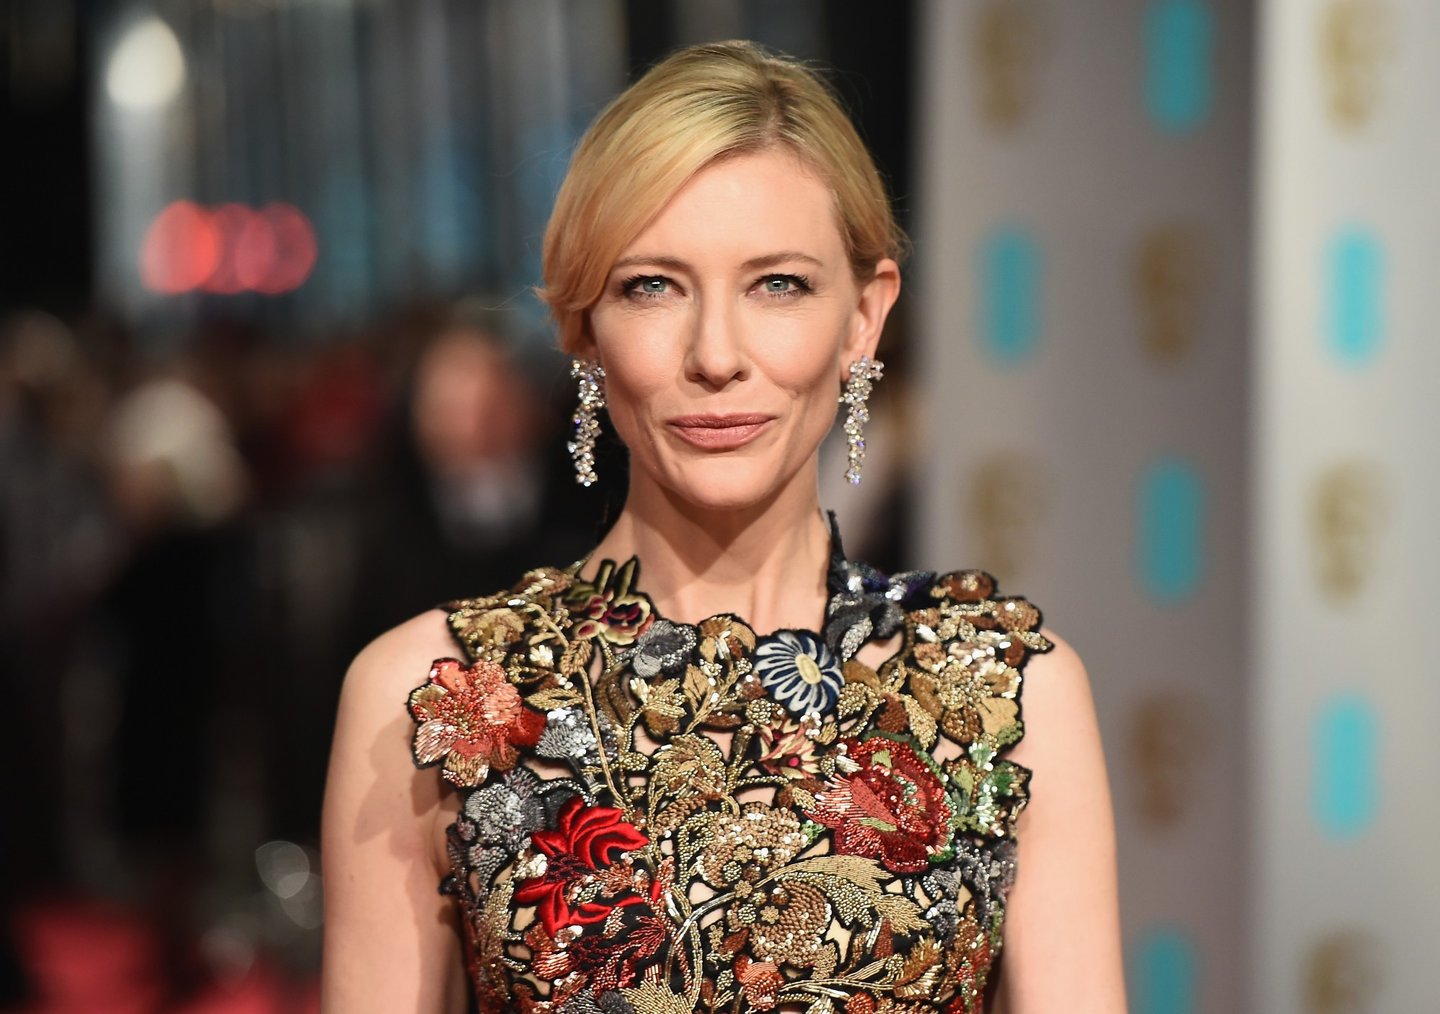 LONDON, ENGLAND - FEBRUARY 14: Cate Blanchett attends the EE British Academy Film Awards at the Royal Opera House on February 14, 2016 in London, England. (Photo by Ian Gavan/Getty Images)